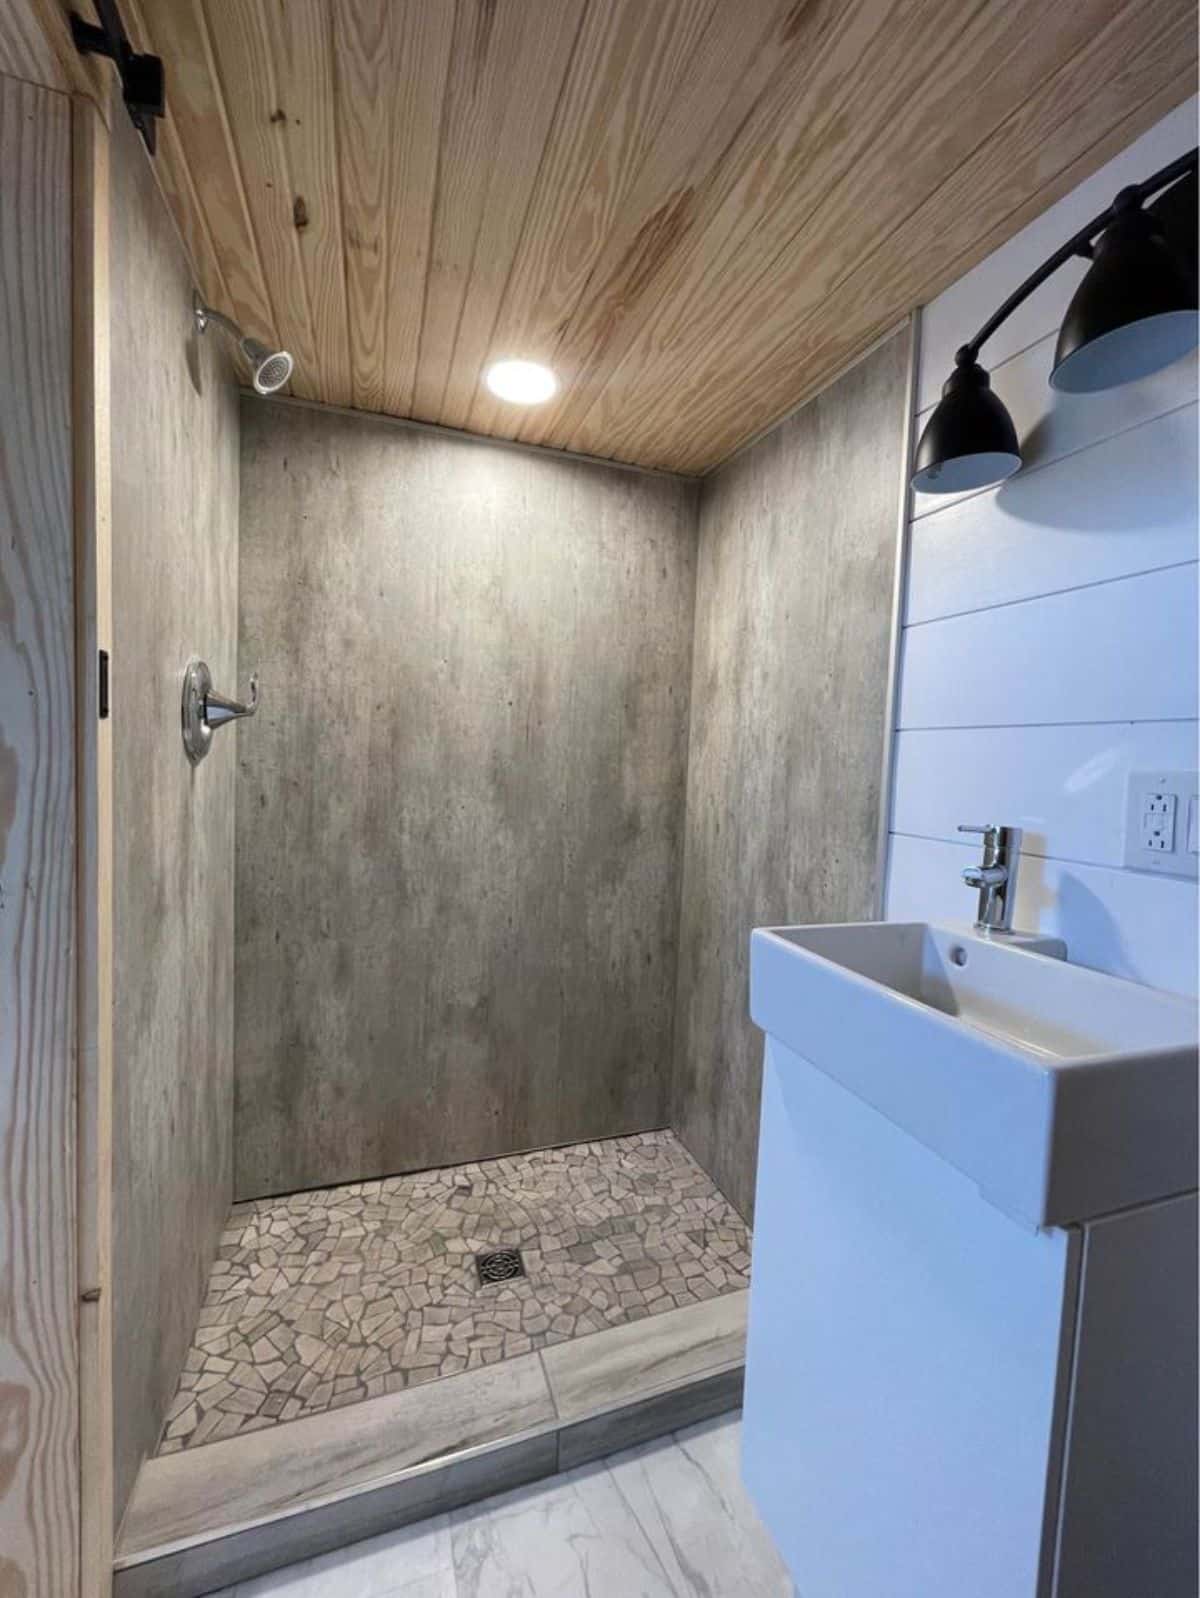 Separate shower area in bathroom of 24' Luxury Tiny House